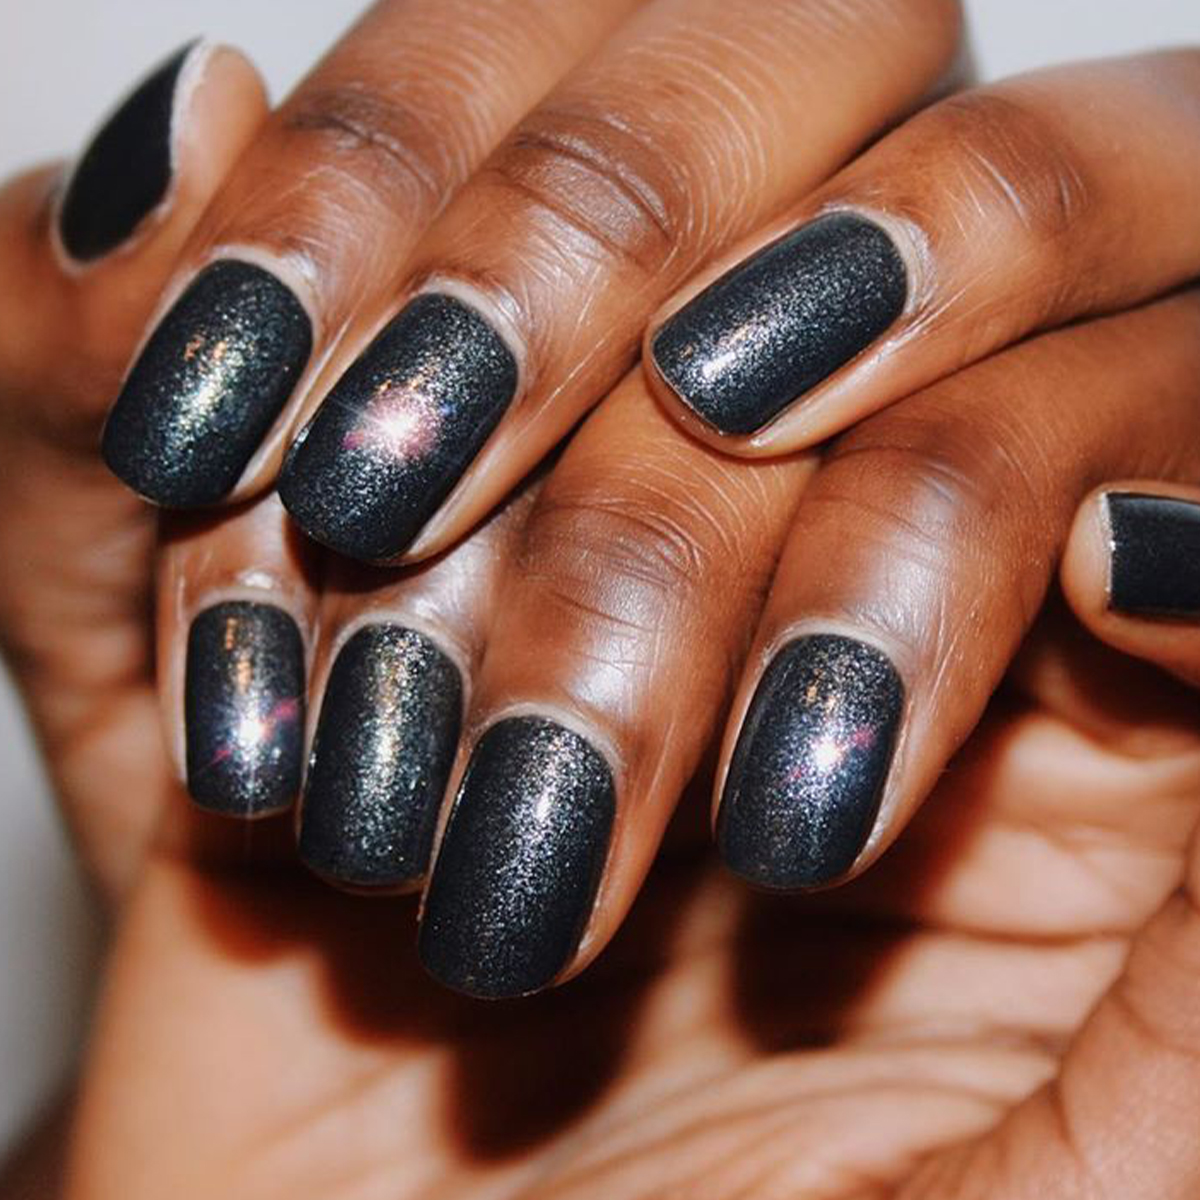 10 October Nail Colors That Feel So Festive | Who What Wear